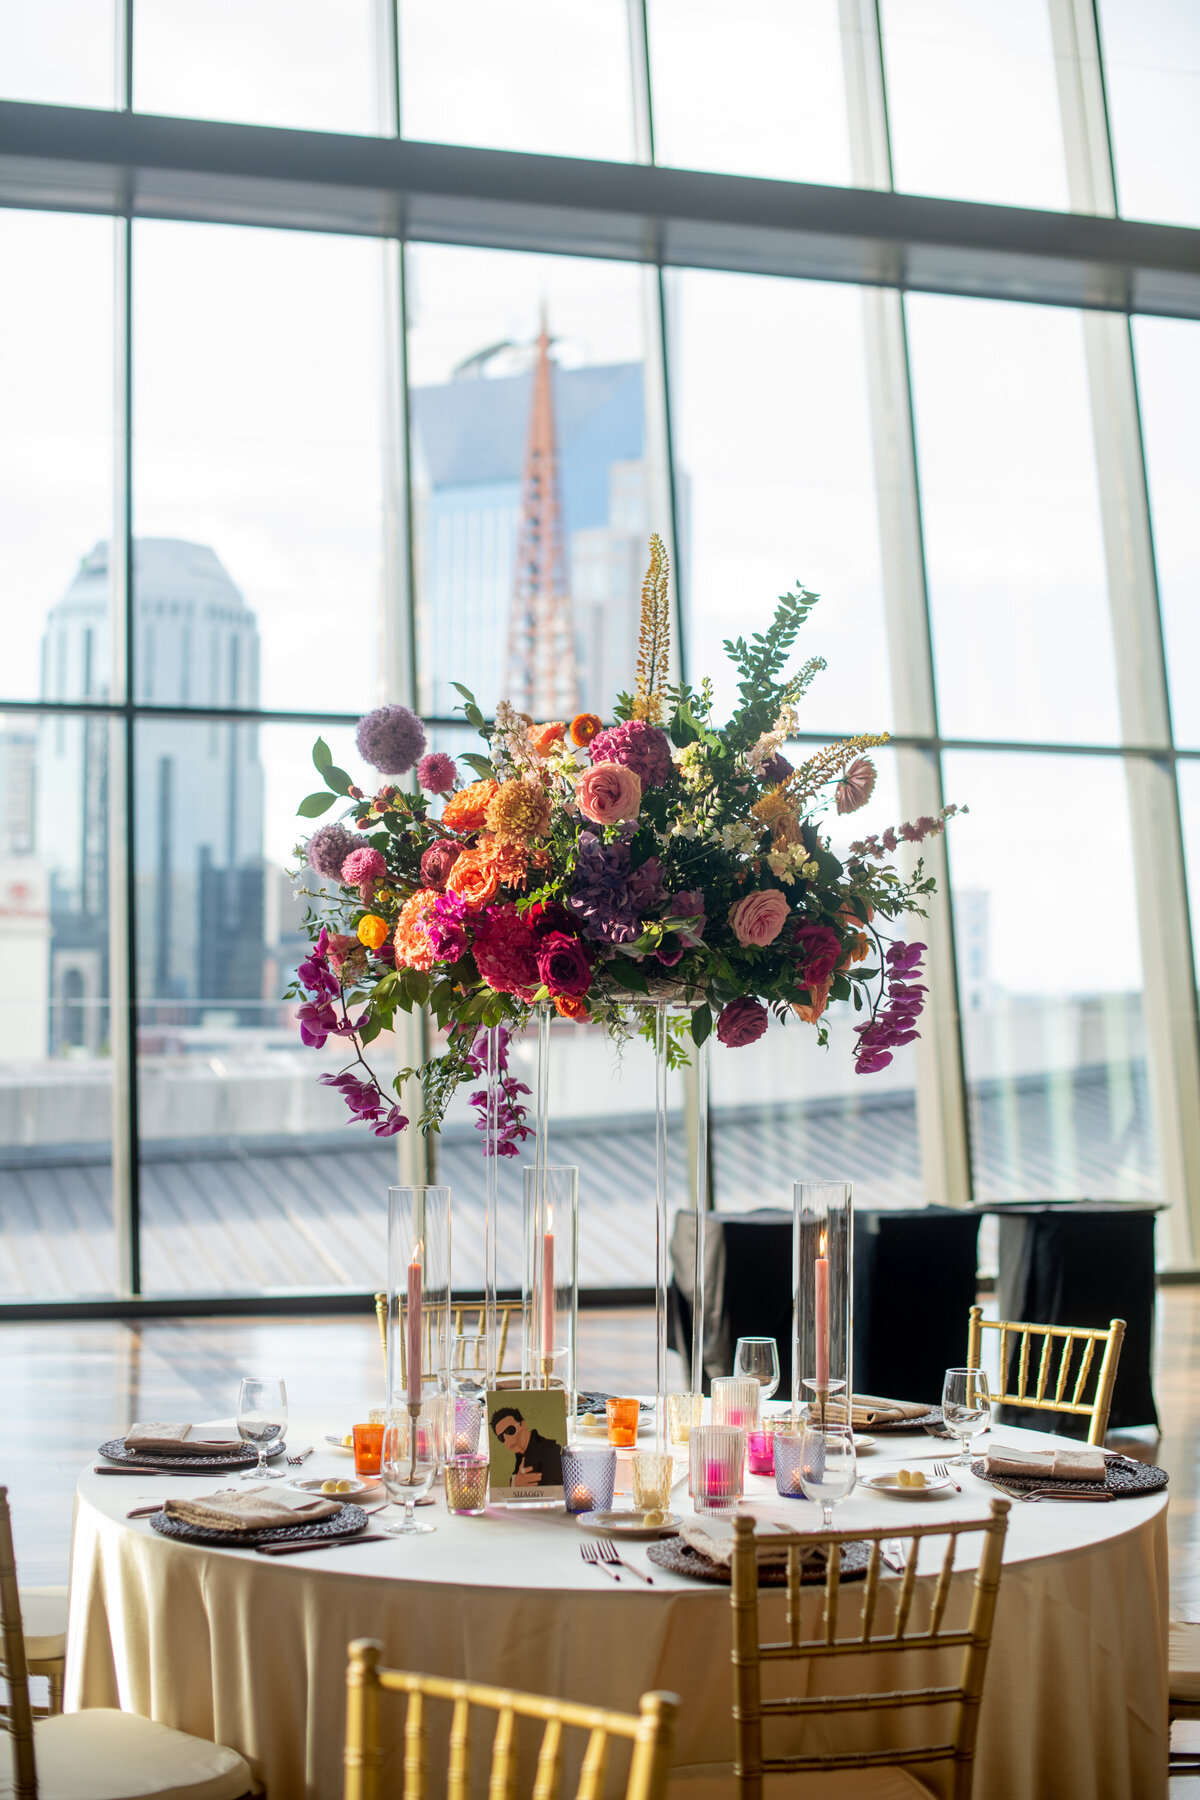 Lush elevated centerpieces in sunset hues of rosy pink, lavender, orange, and golden-yellow composed of phalaenopsis orchids, petal heavy roses, allium, delphinium, eremurus and natural greenery. Design by Rosemary and Finch in Nashville, TN.